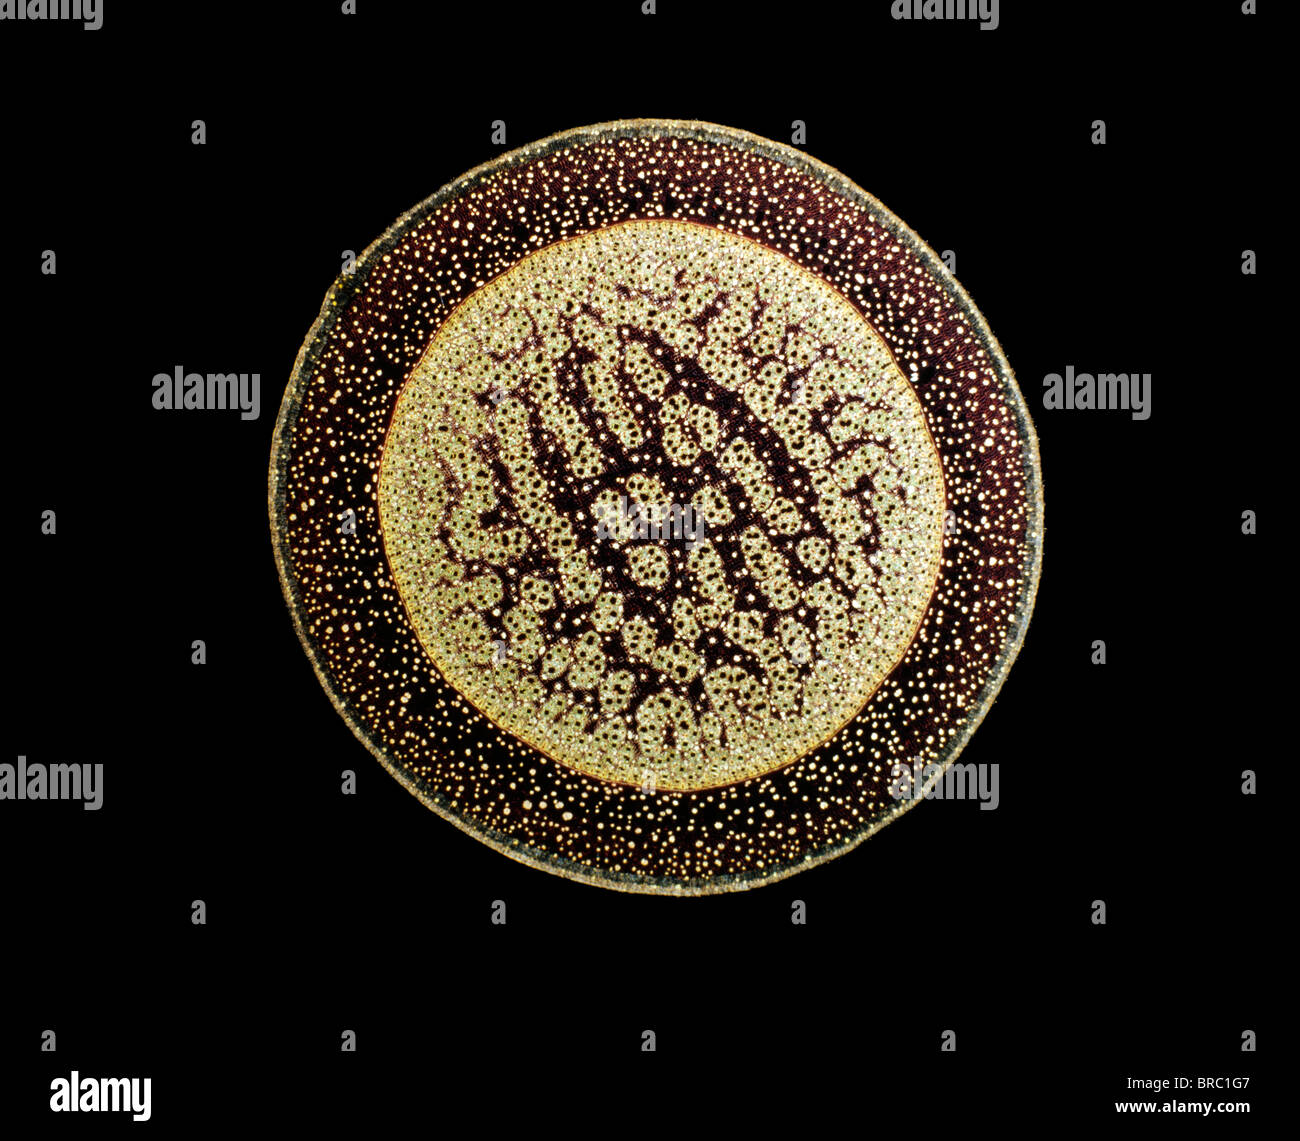 Light Micrograph (LM) of a transverse section of an aerial root of a Pandanus sp., magnification x30 Stock Photo